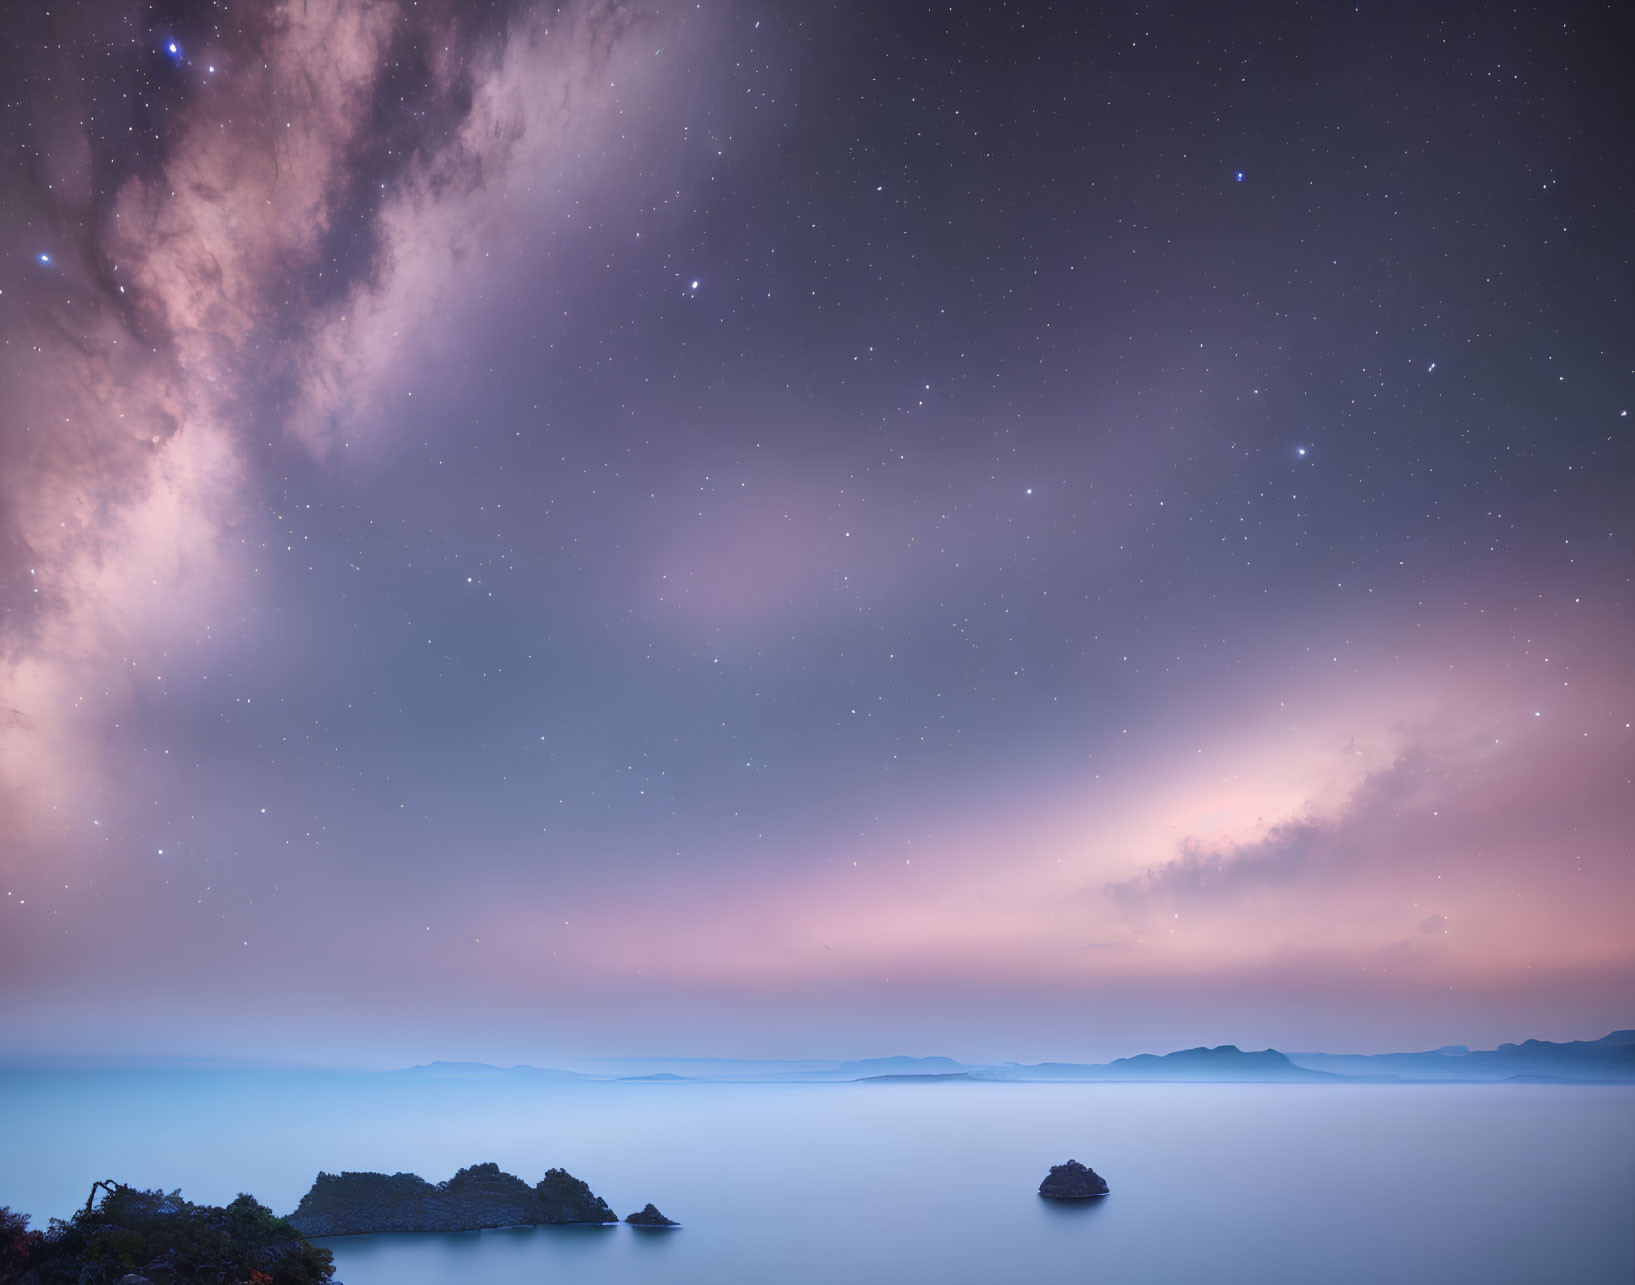 Twilight sky with Milky Way galaxy over calm sea and distant islands in blue to pink hues